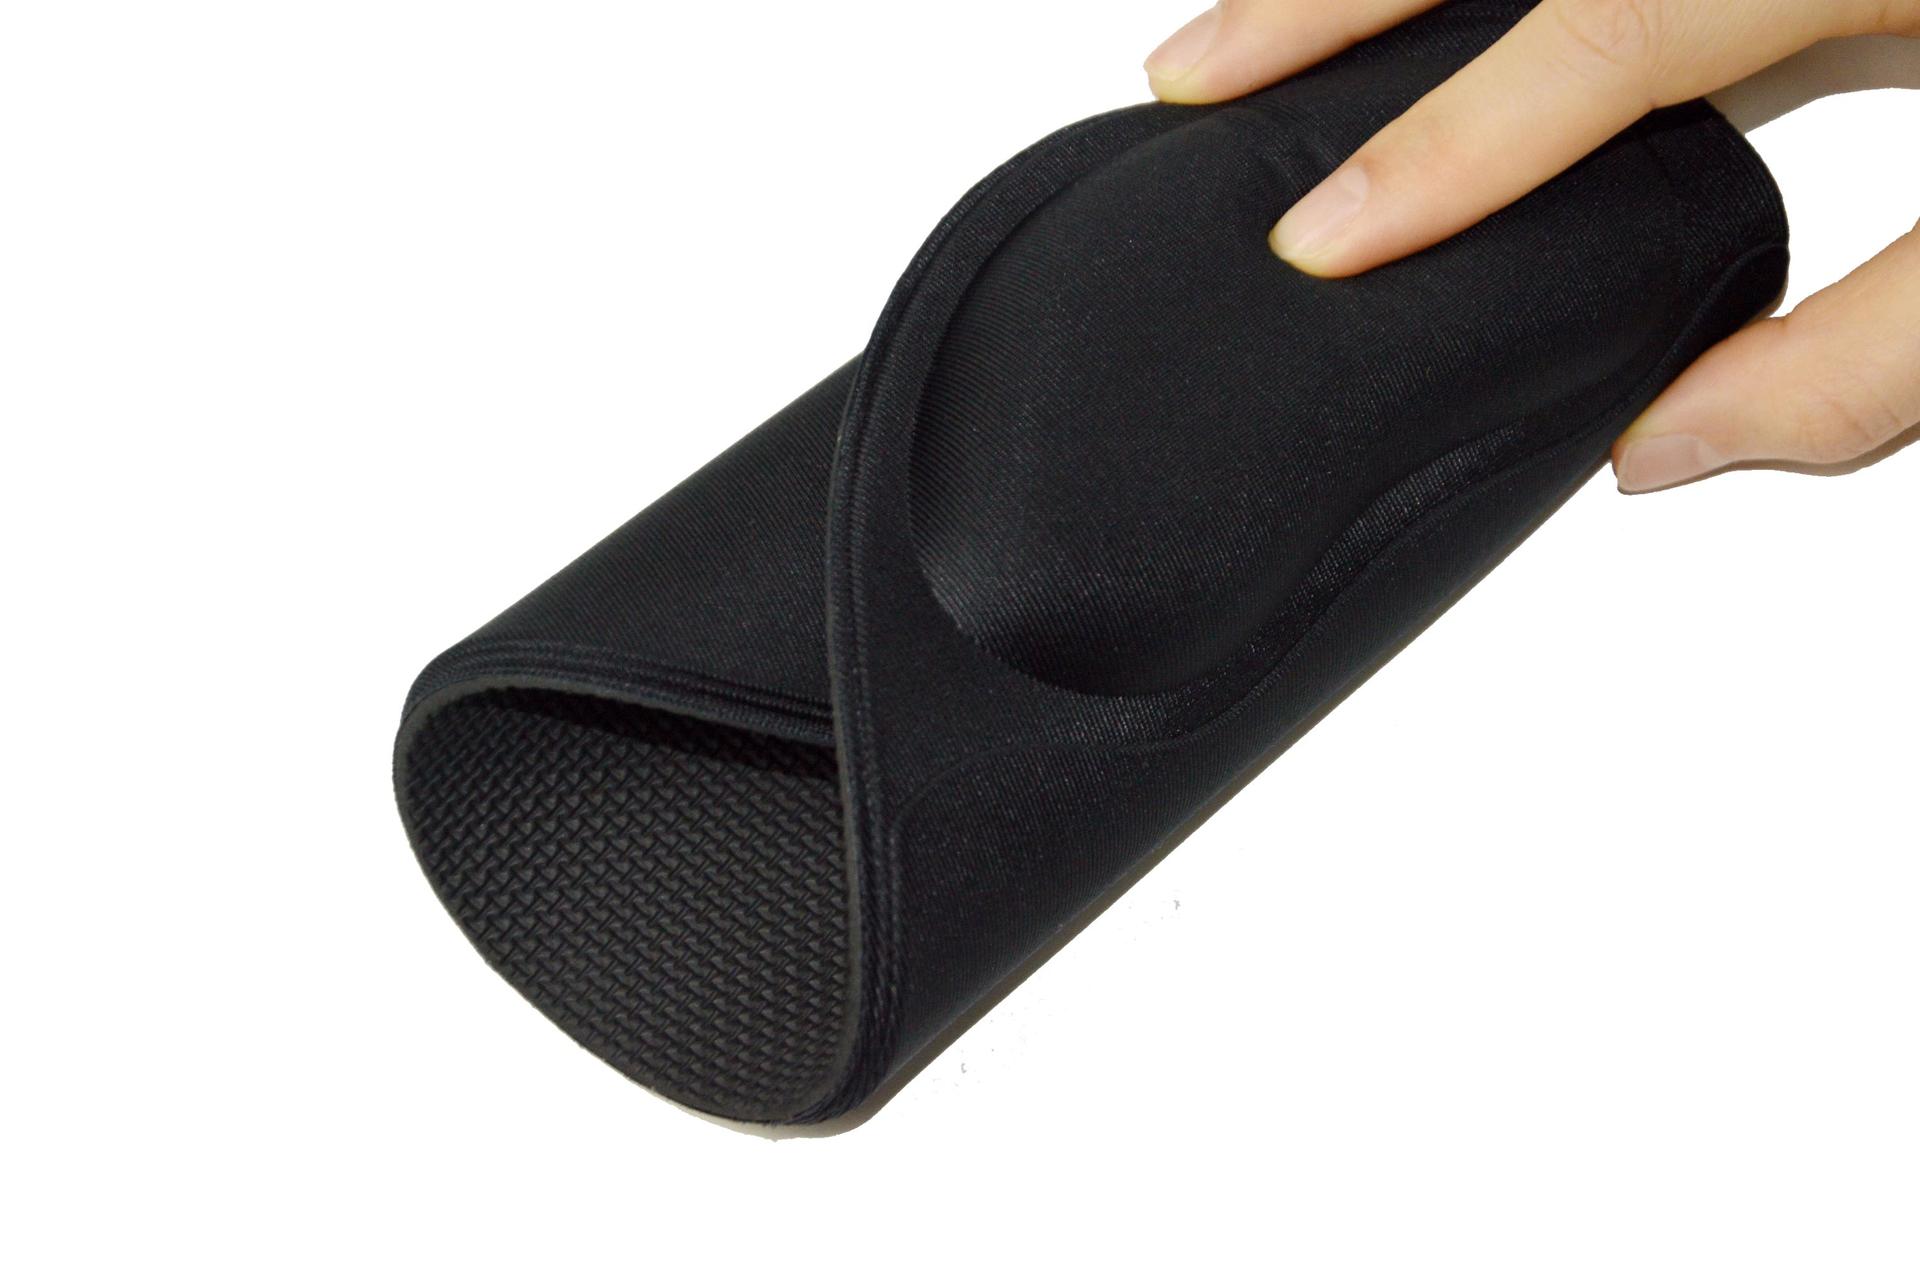 New product - Foam wrist rest mouse pad with anti-slip SBR bottom comfortable foam hand pillow mouse pad